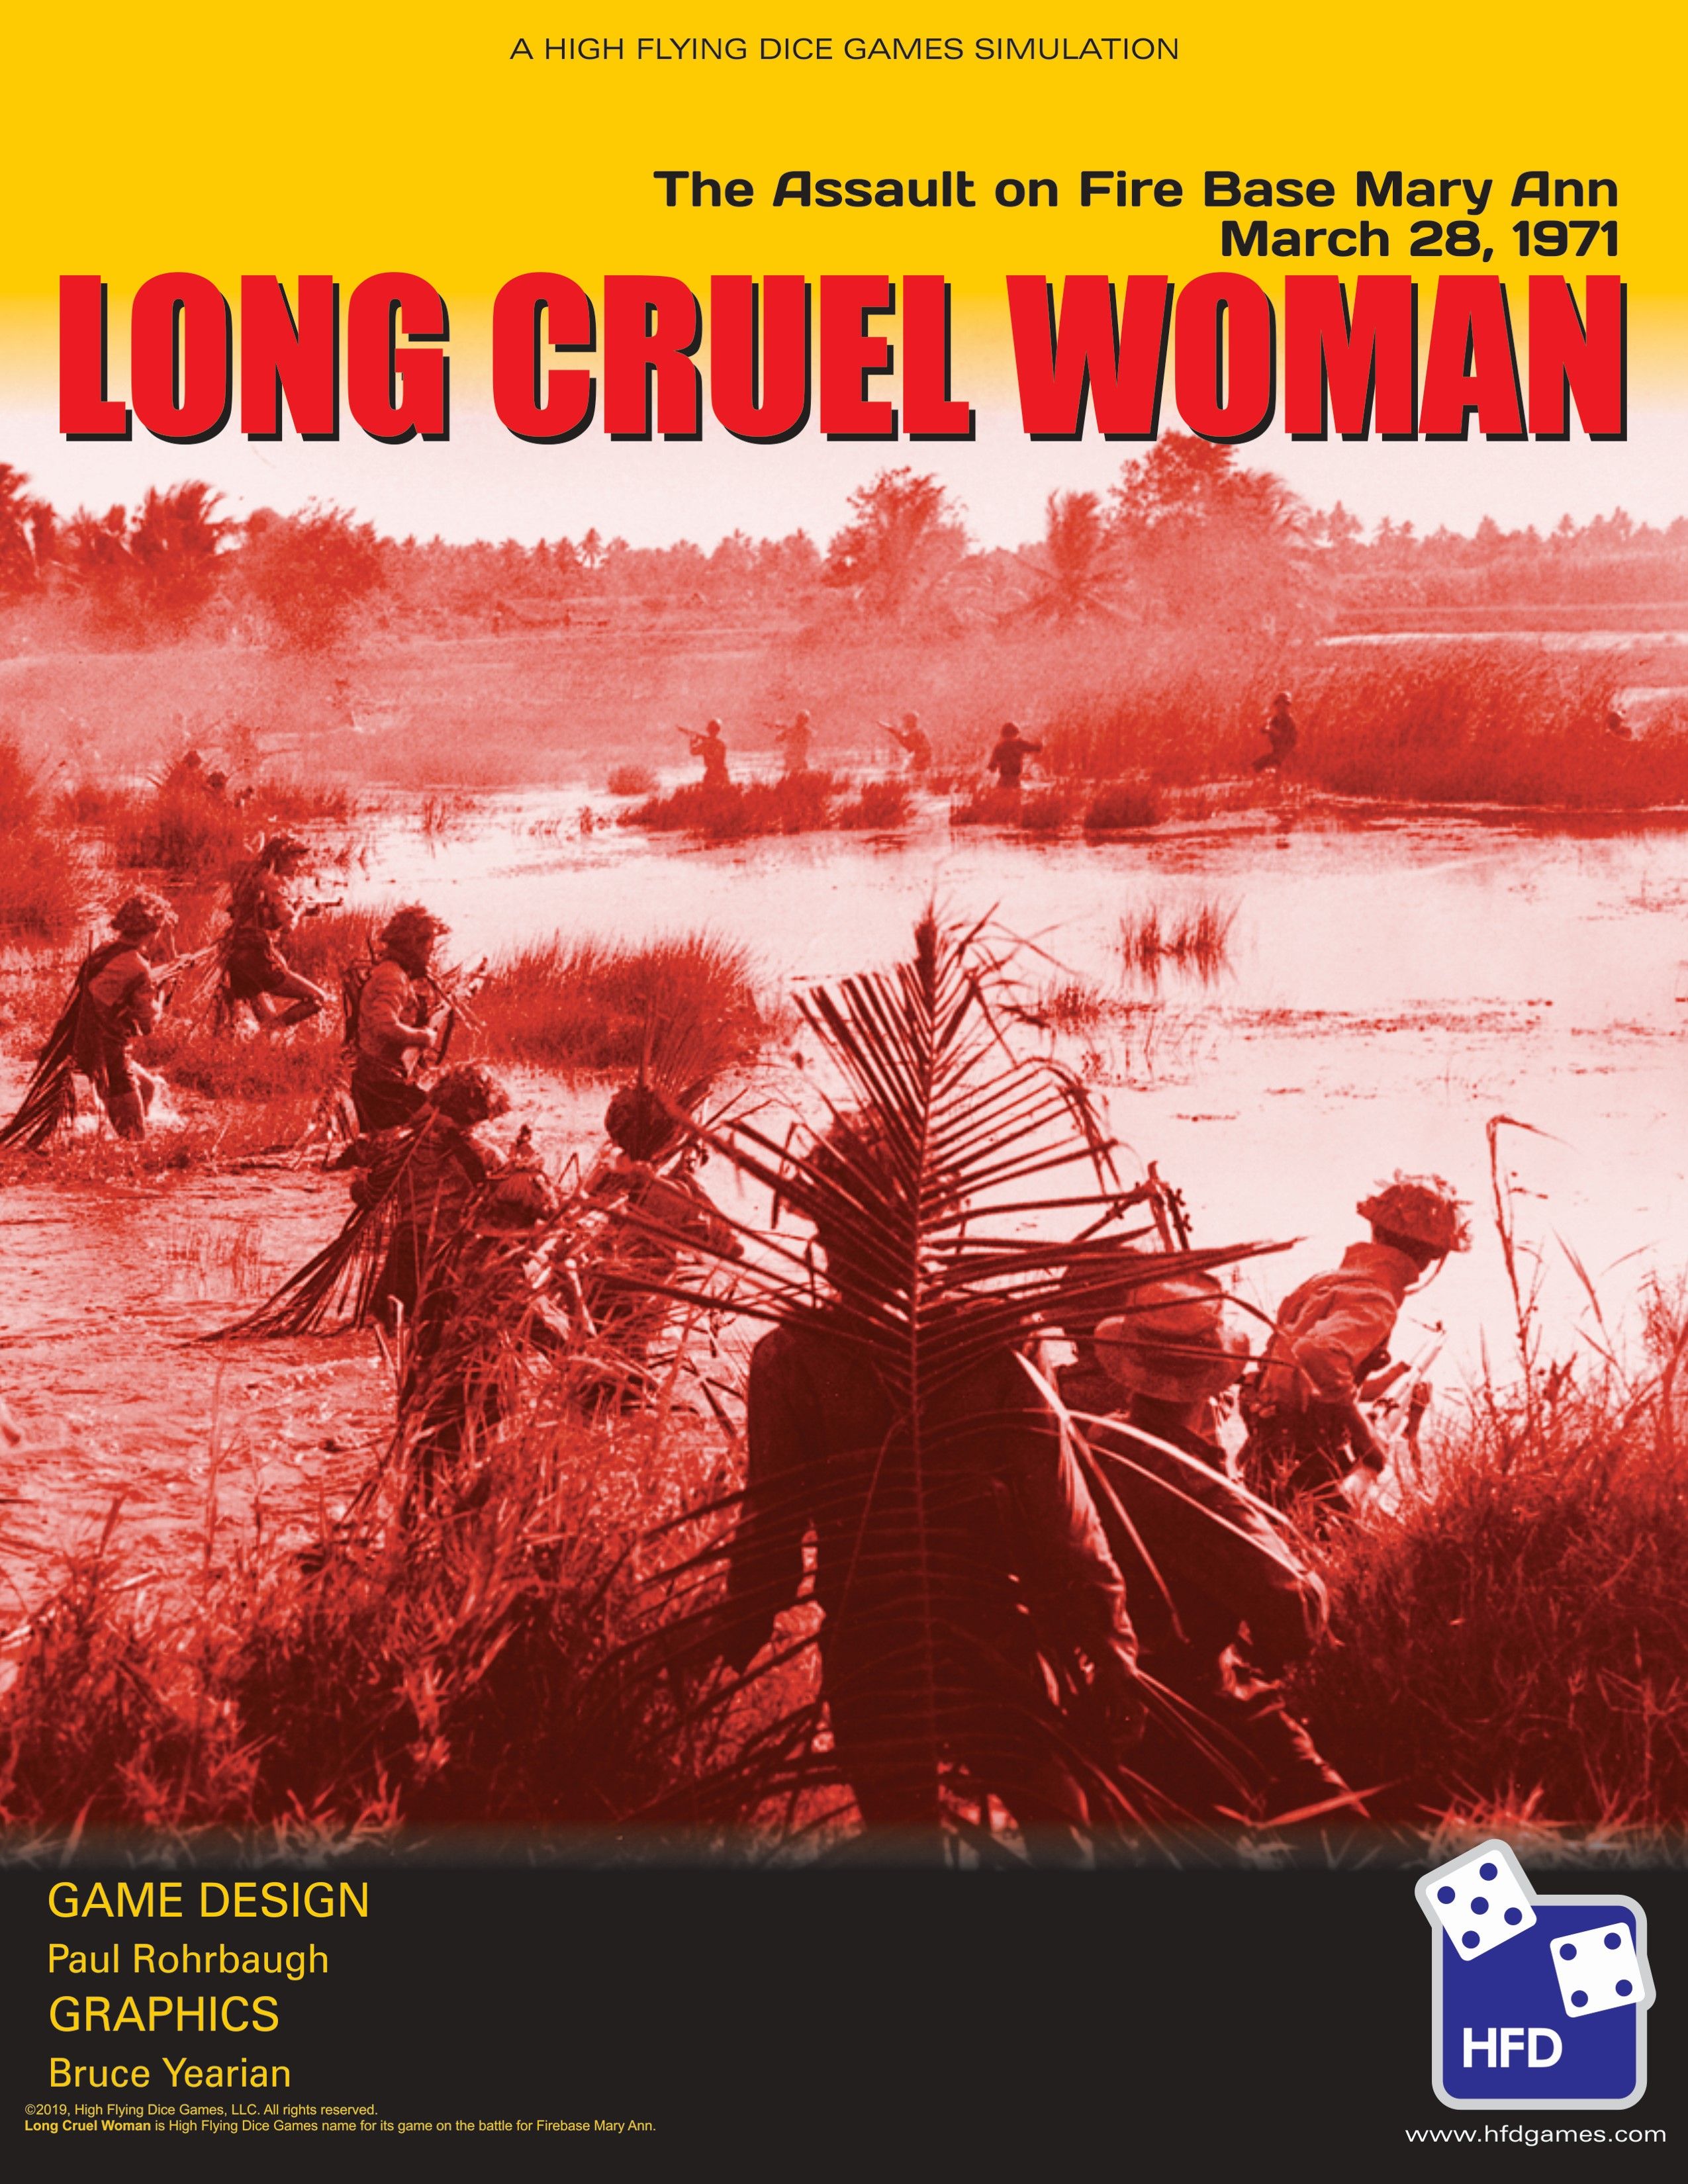 Long, Cruel Woman: The Attack on Firebase Mary Ann, March 28, 1971